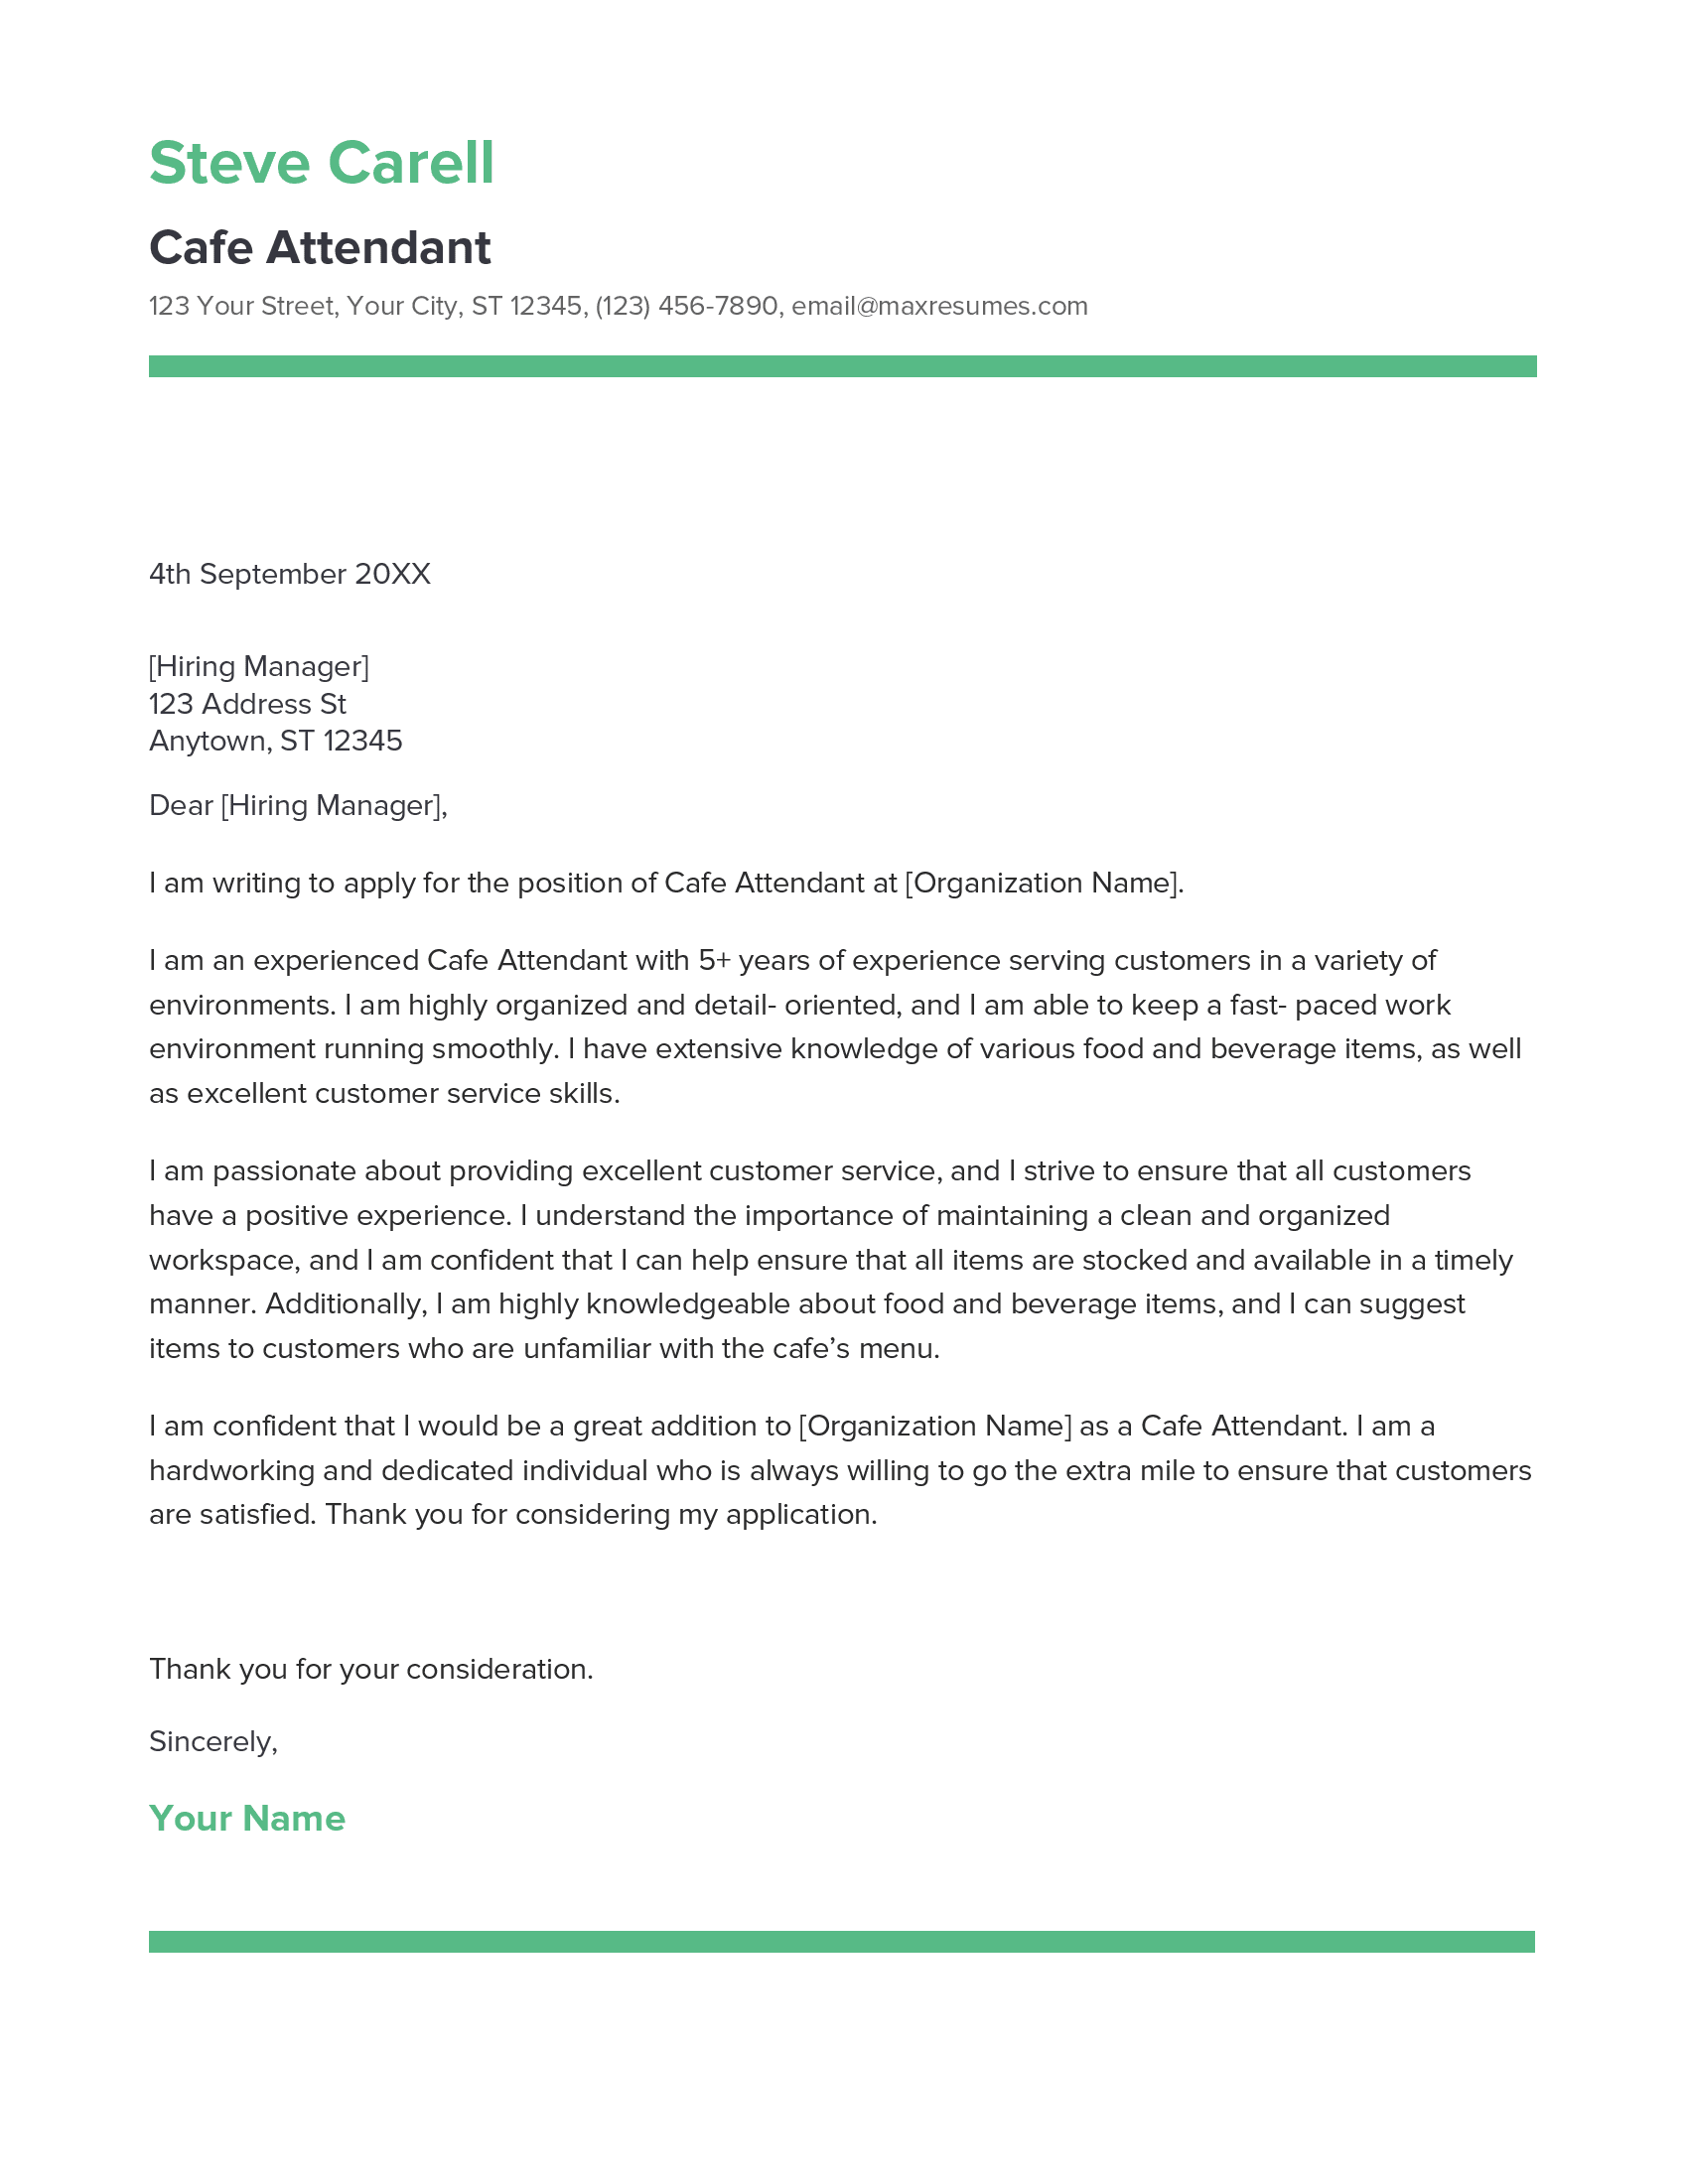 Cafe Attendant Cover Letter Example